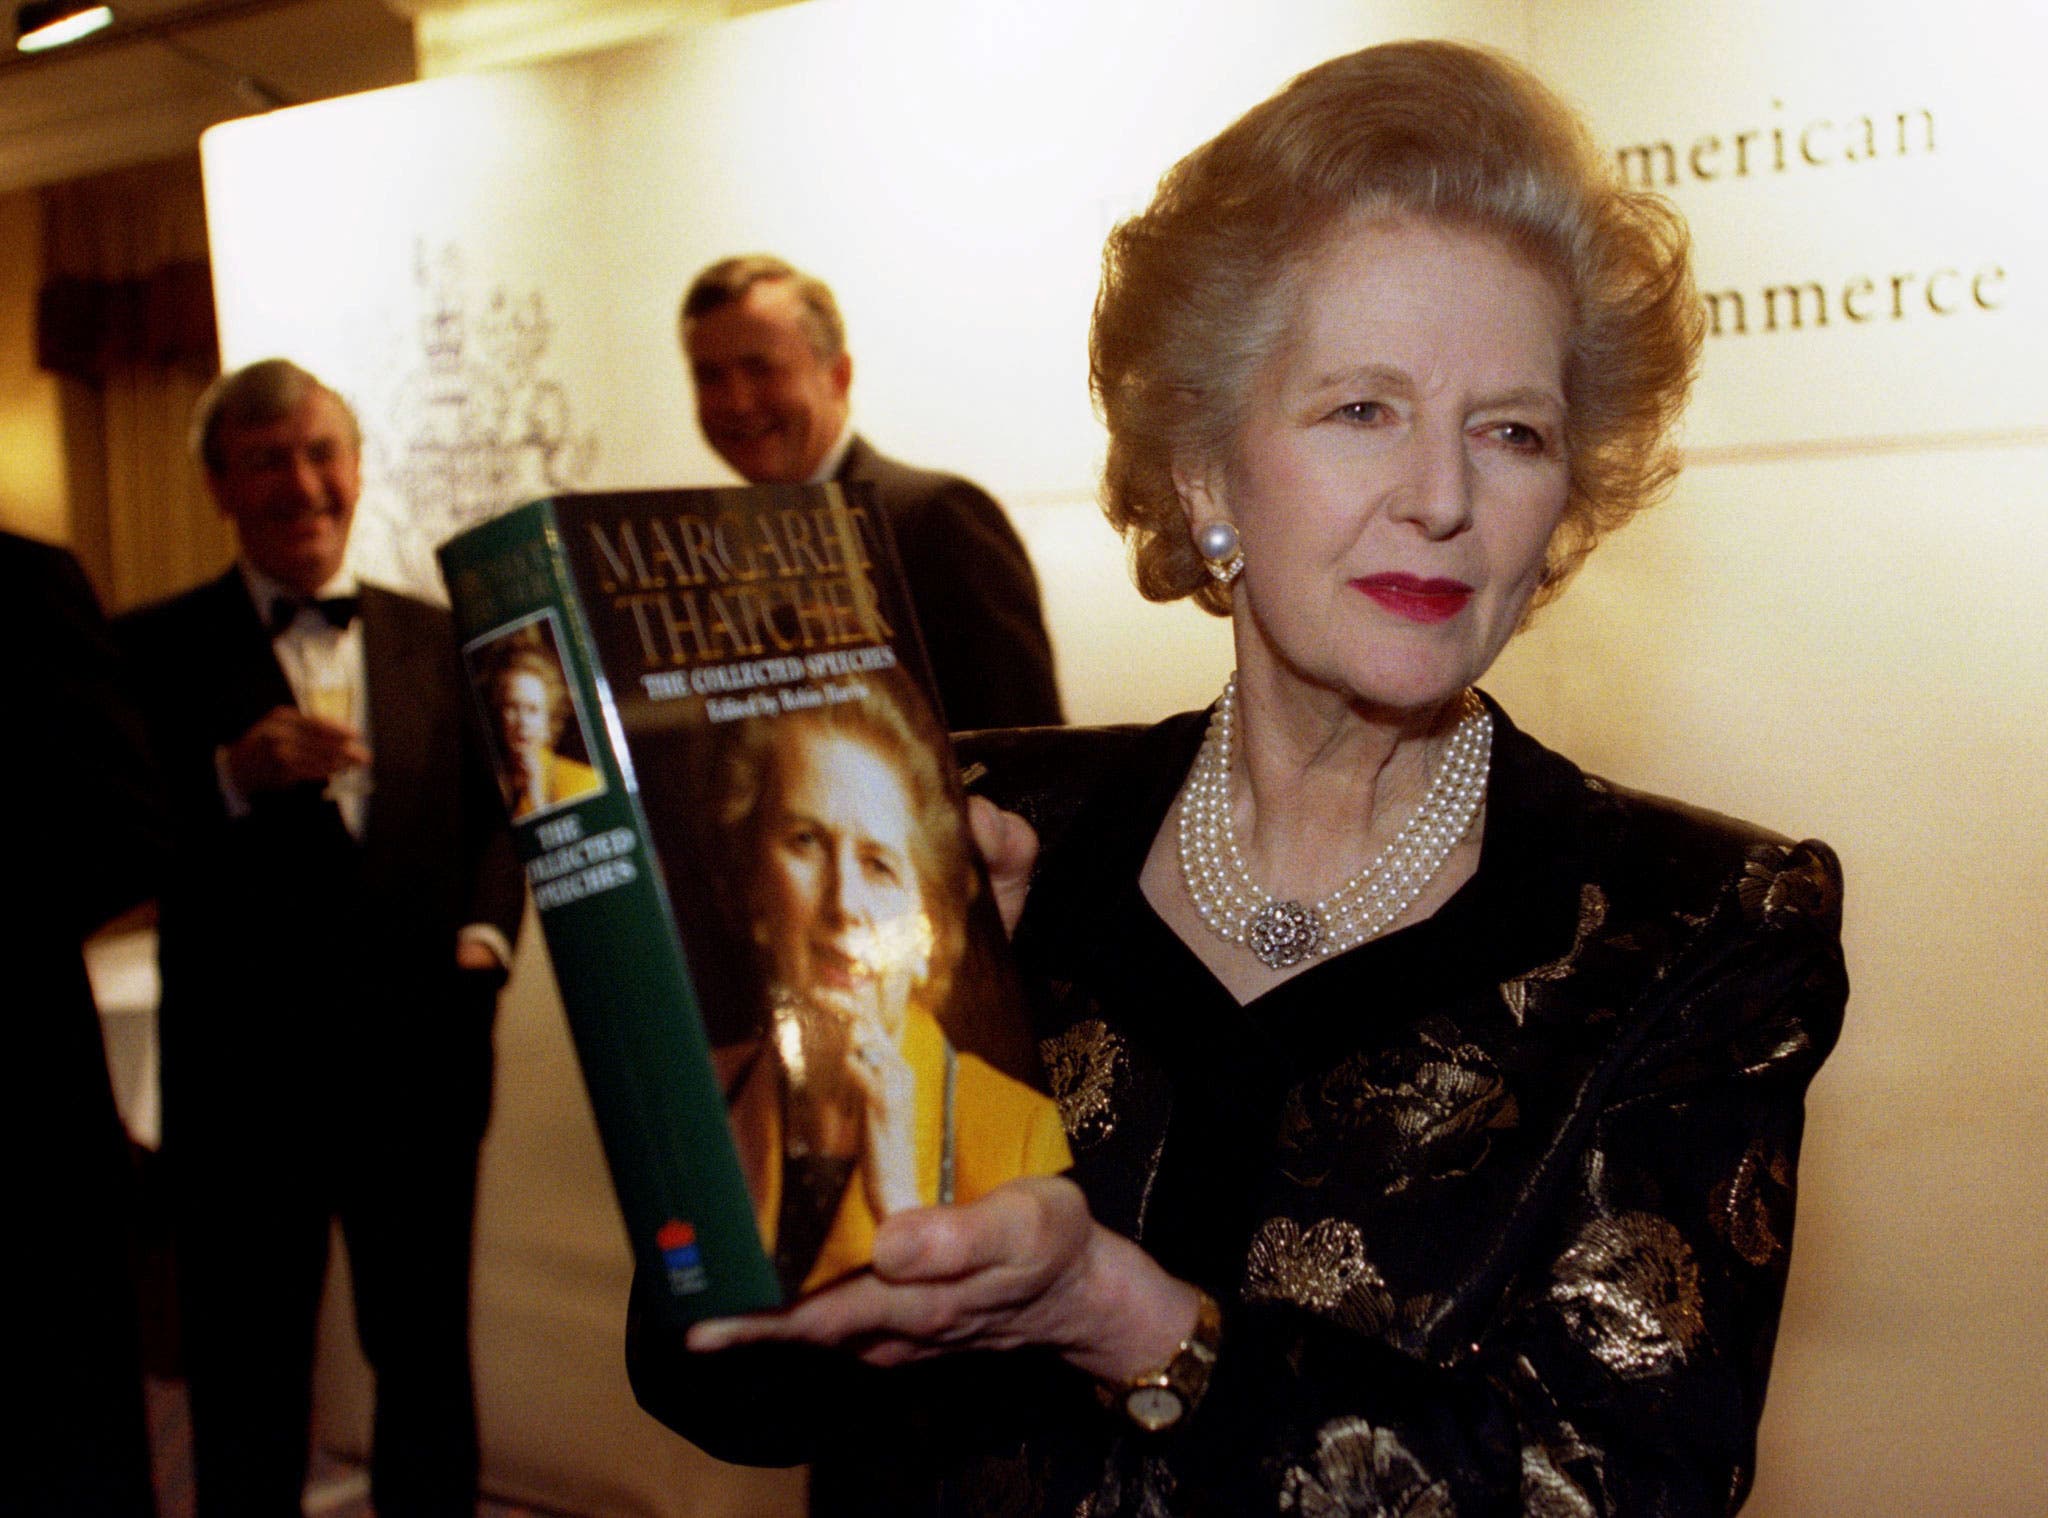 Baroness Margaret Thatcher poses with a copy of her new book at a launch attended by members of the British-American Chamber of Commerce in this November 25, 1997 file photo. (Reuters)